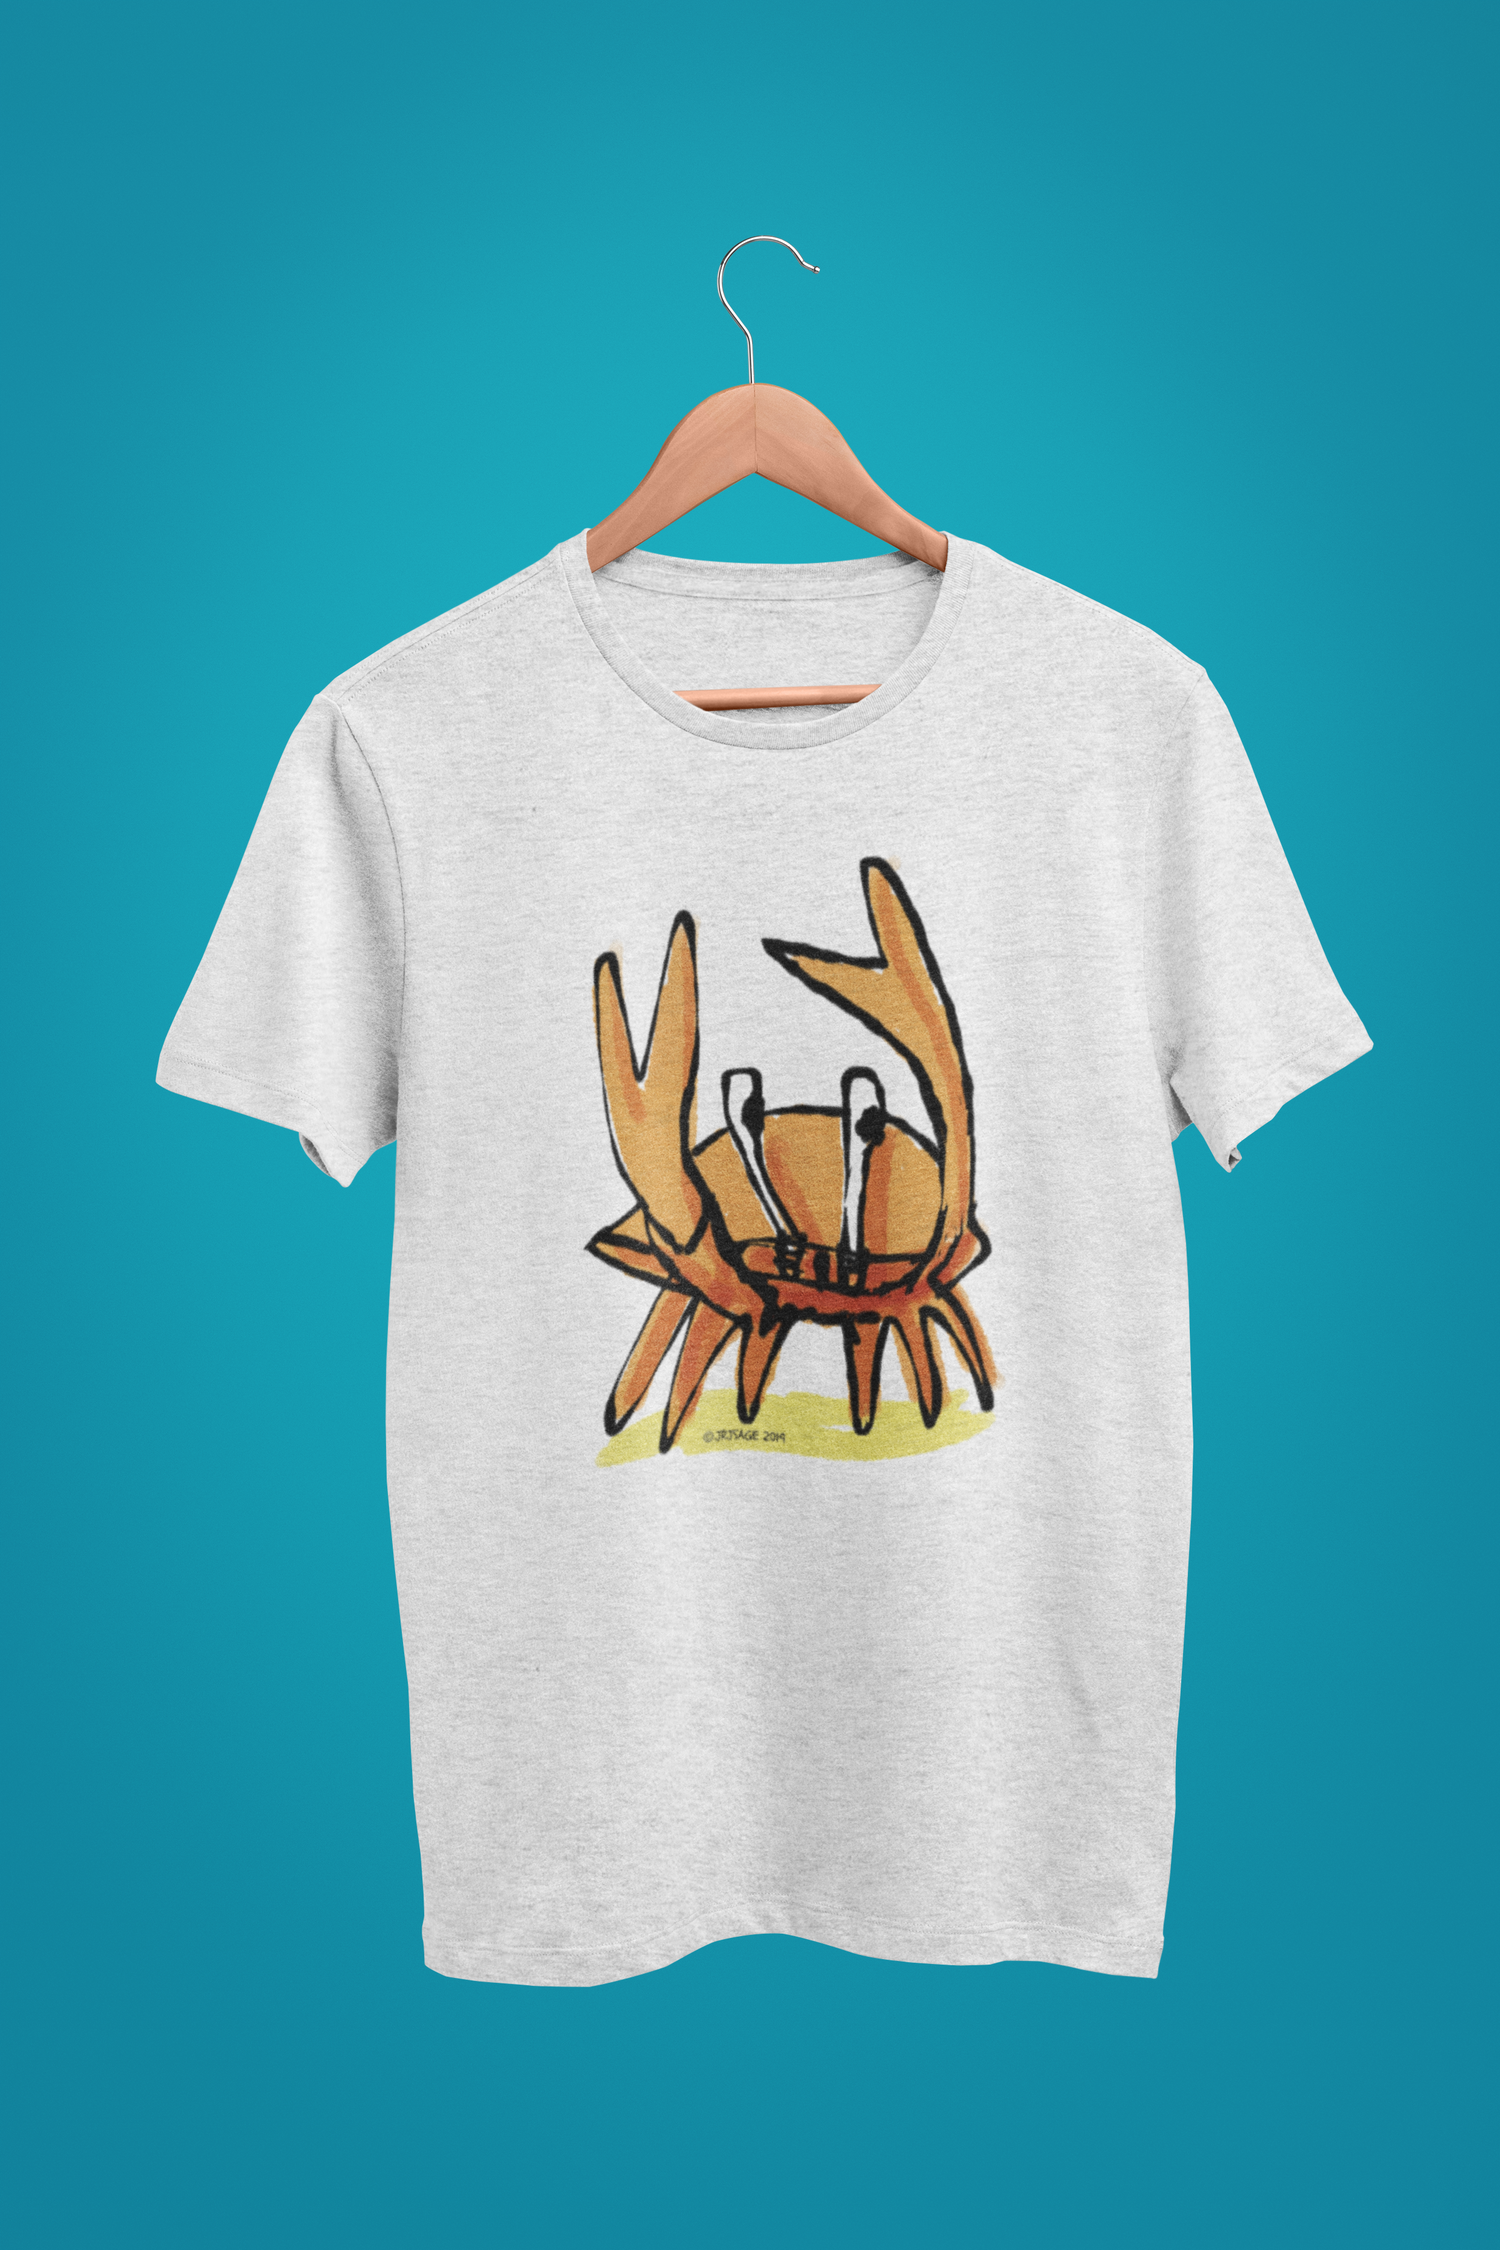 Crab T-shirt - Illustrated funny Angry Crab t-shirts printed on cream heather grey colour vegan cotton by Hector and Bone